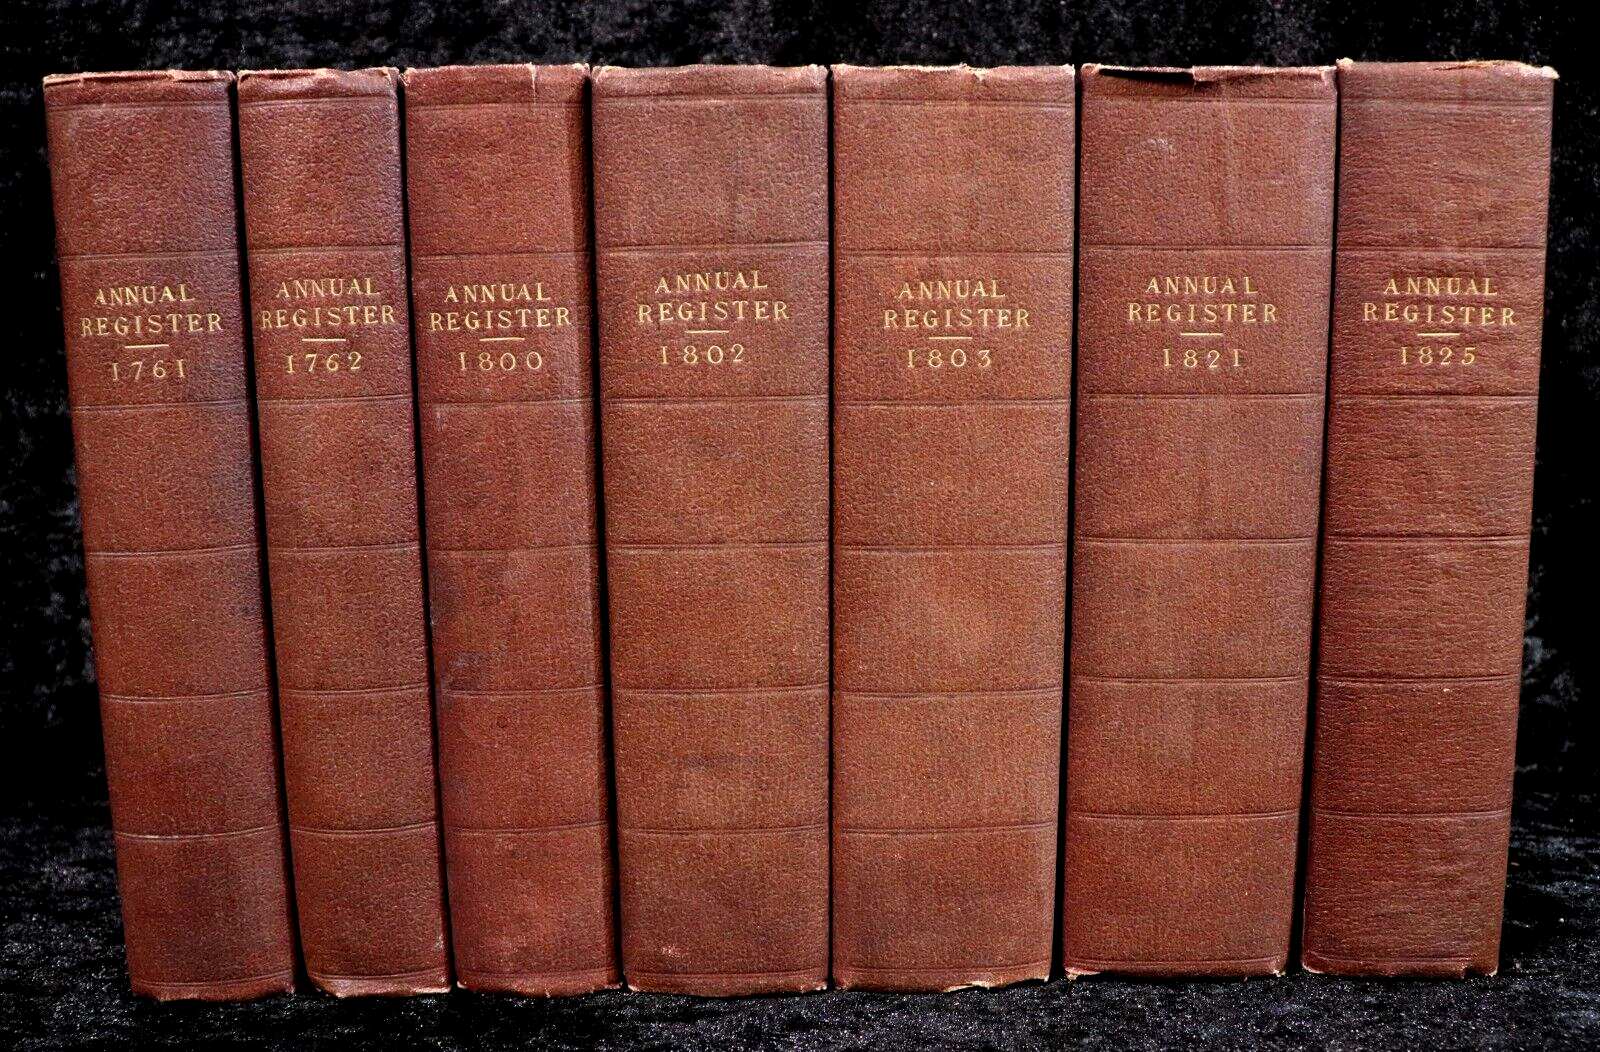 1761-1825 7vol The Annual Register Antiquarian History Books